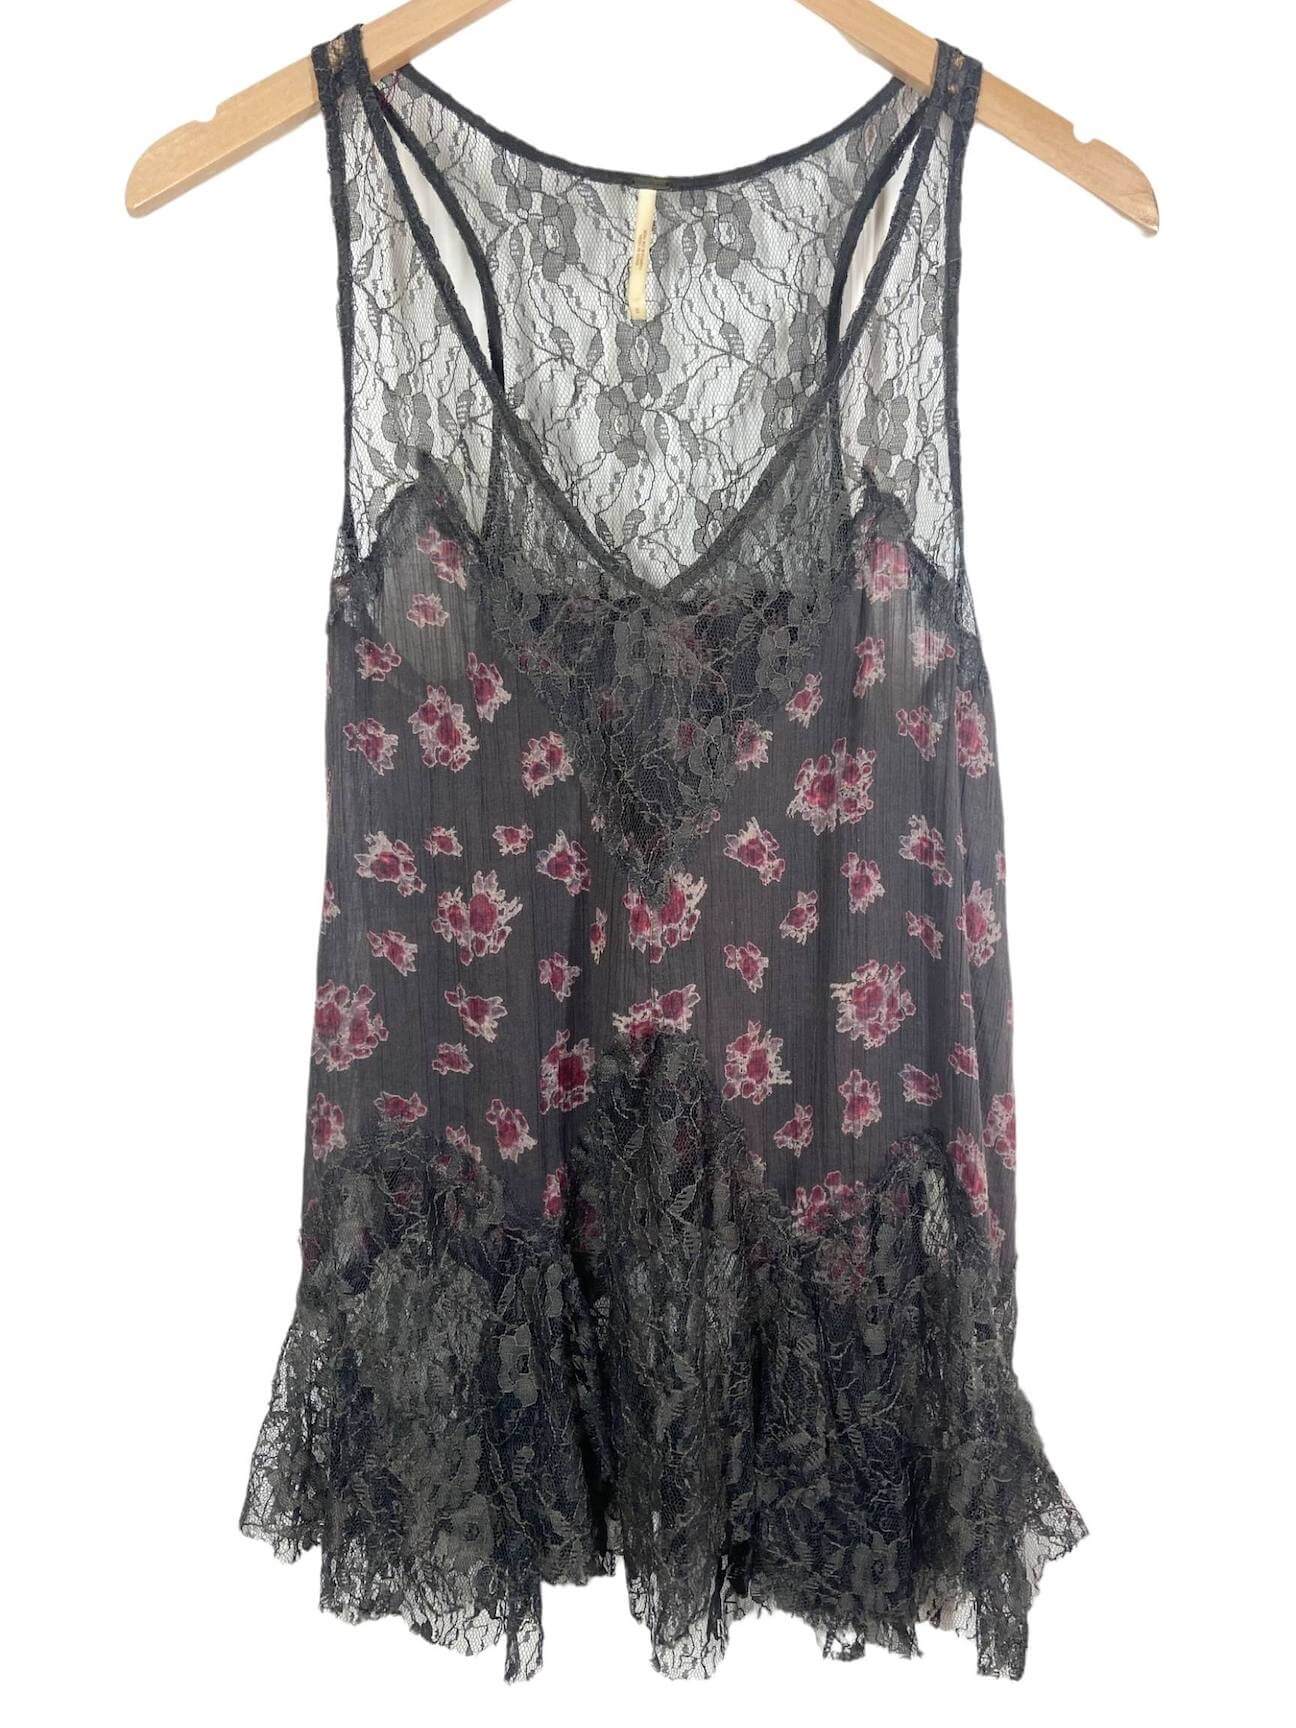 Soft Summer FREE PEOPLE floral lace top